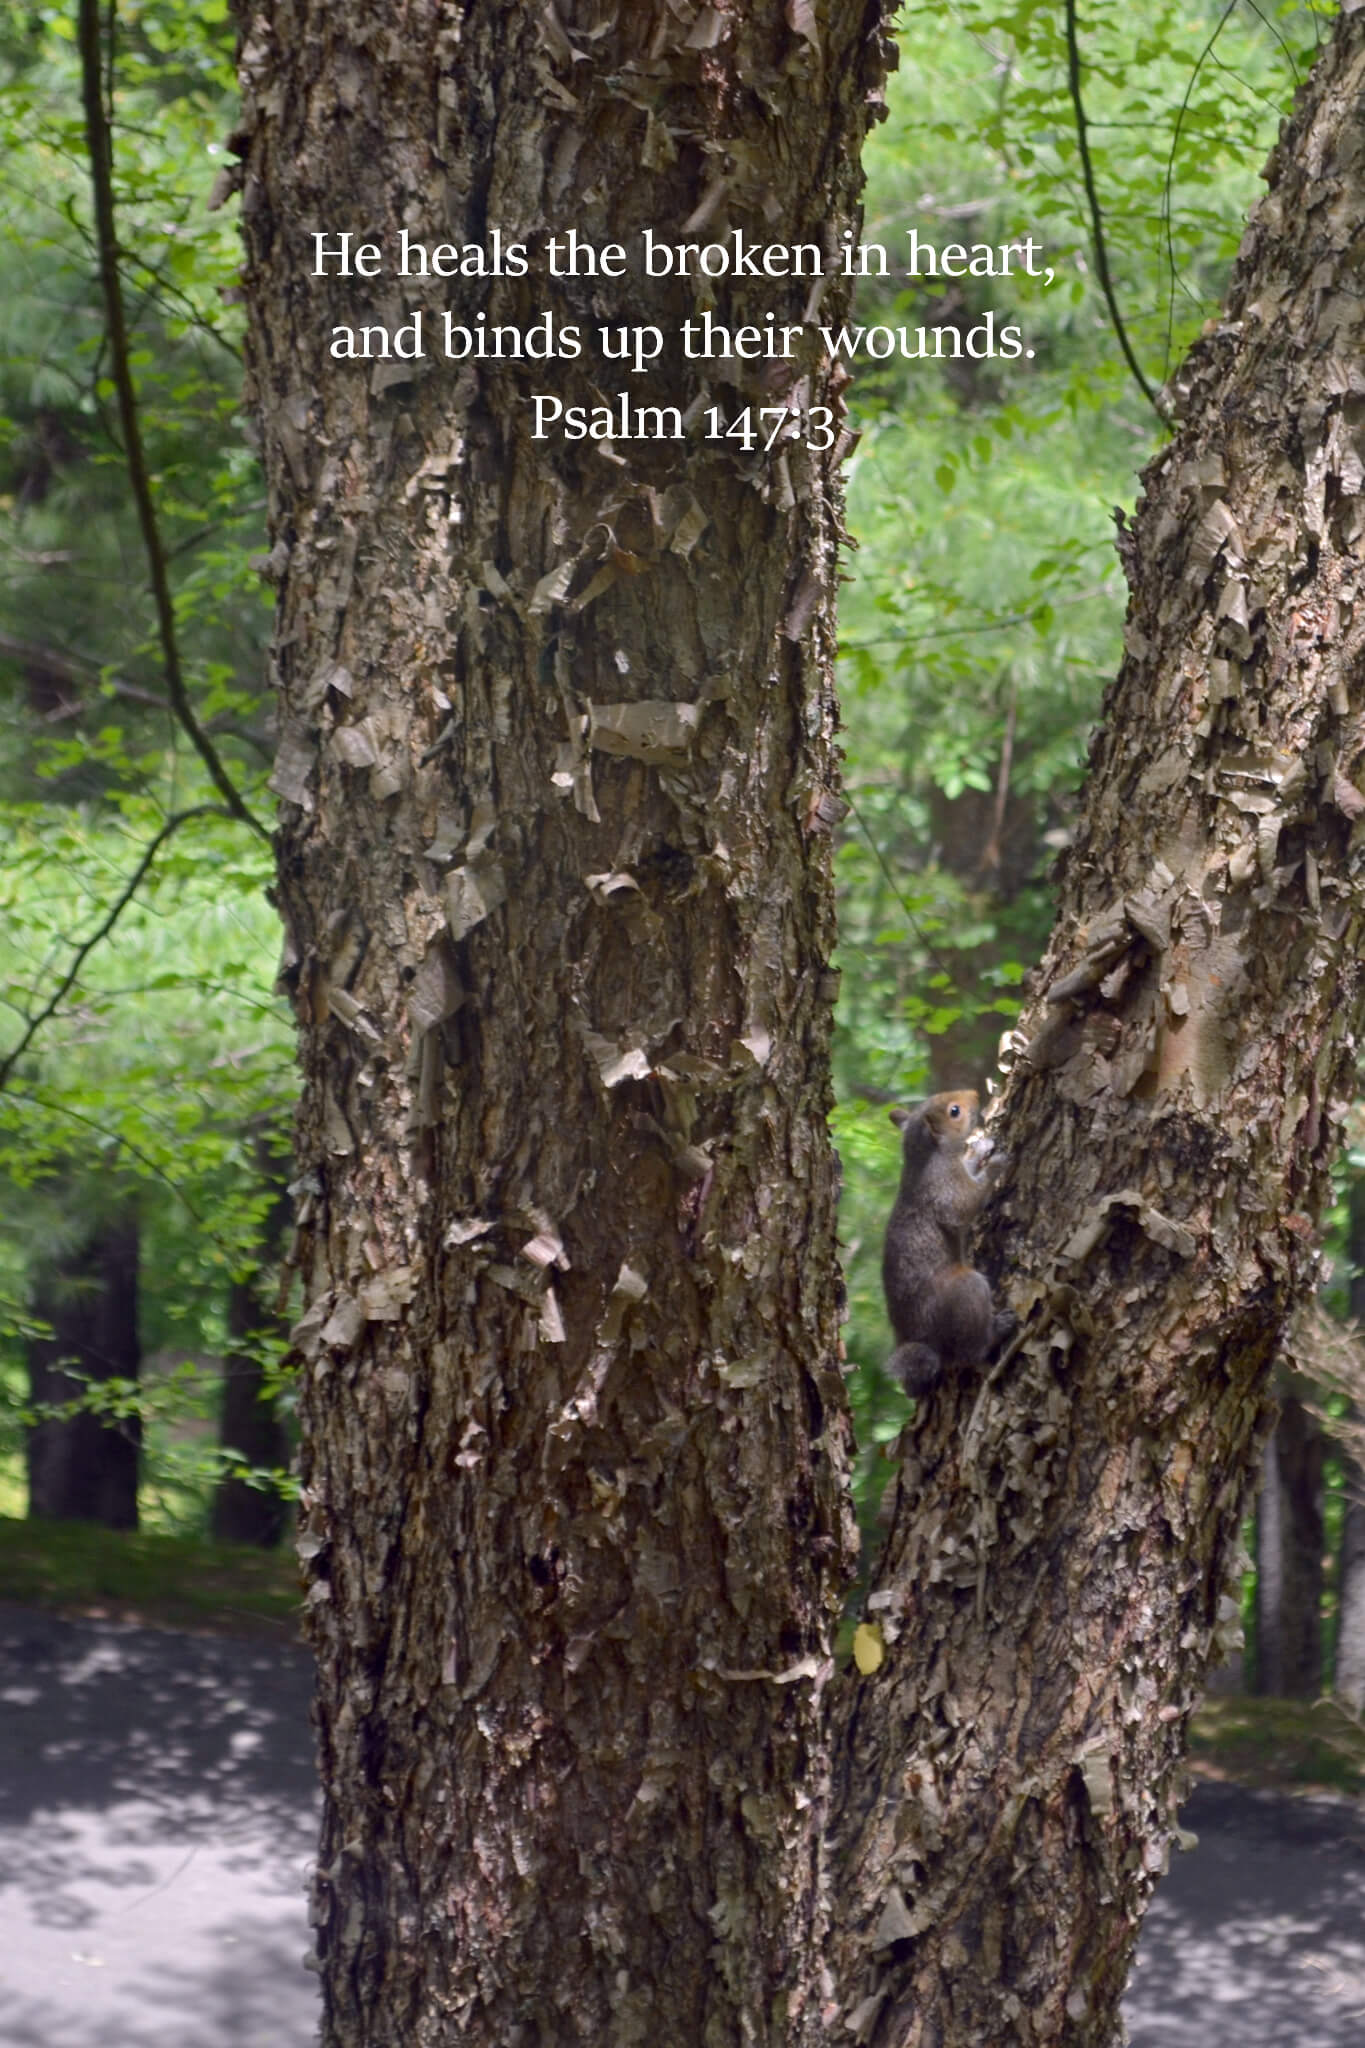 Psalm 147:3 Get Well Soon Squirrel without a Tail Christian greeting card